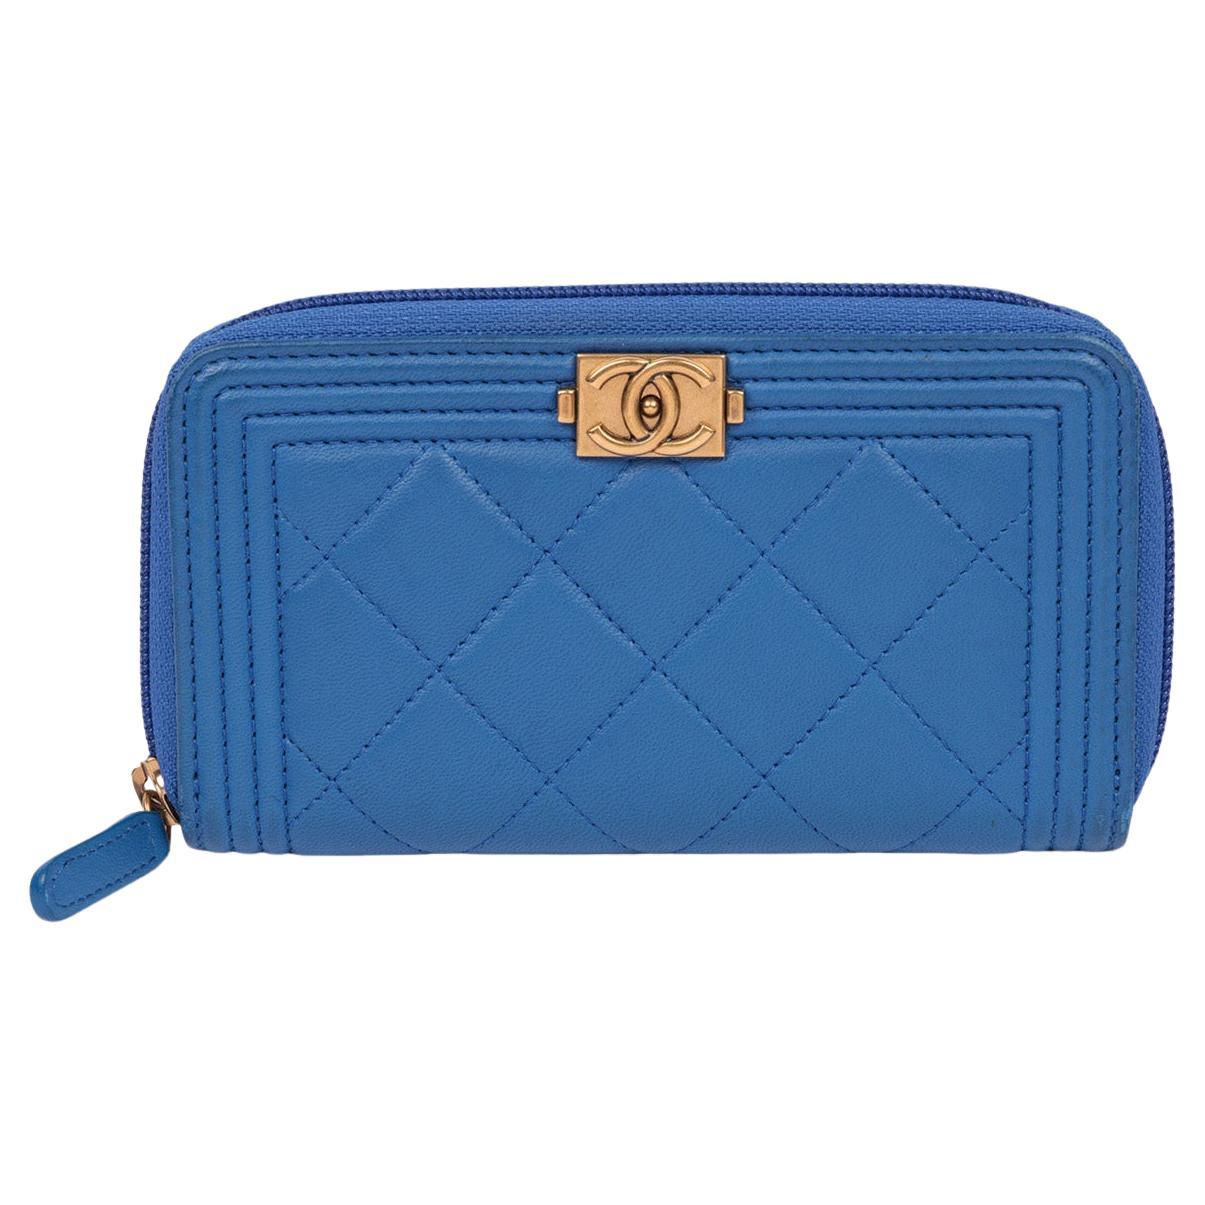 Chanel Blue Quilted Lambskin Le Boy Wallet